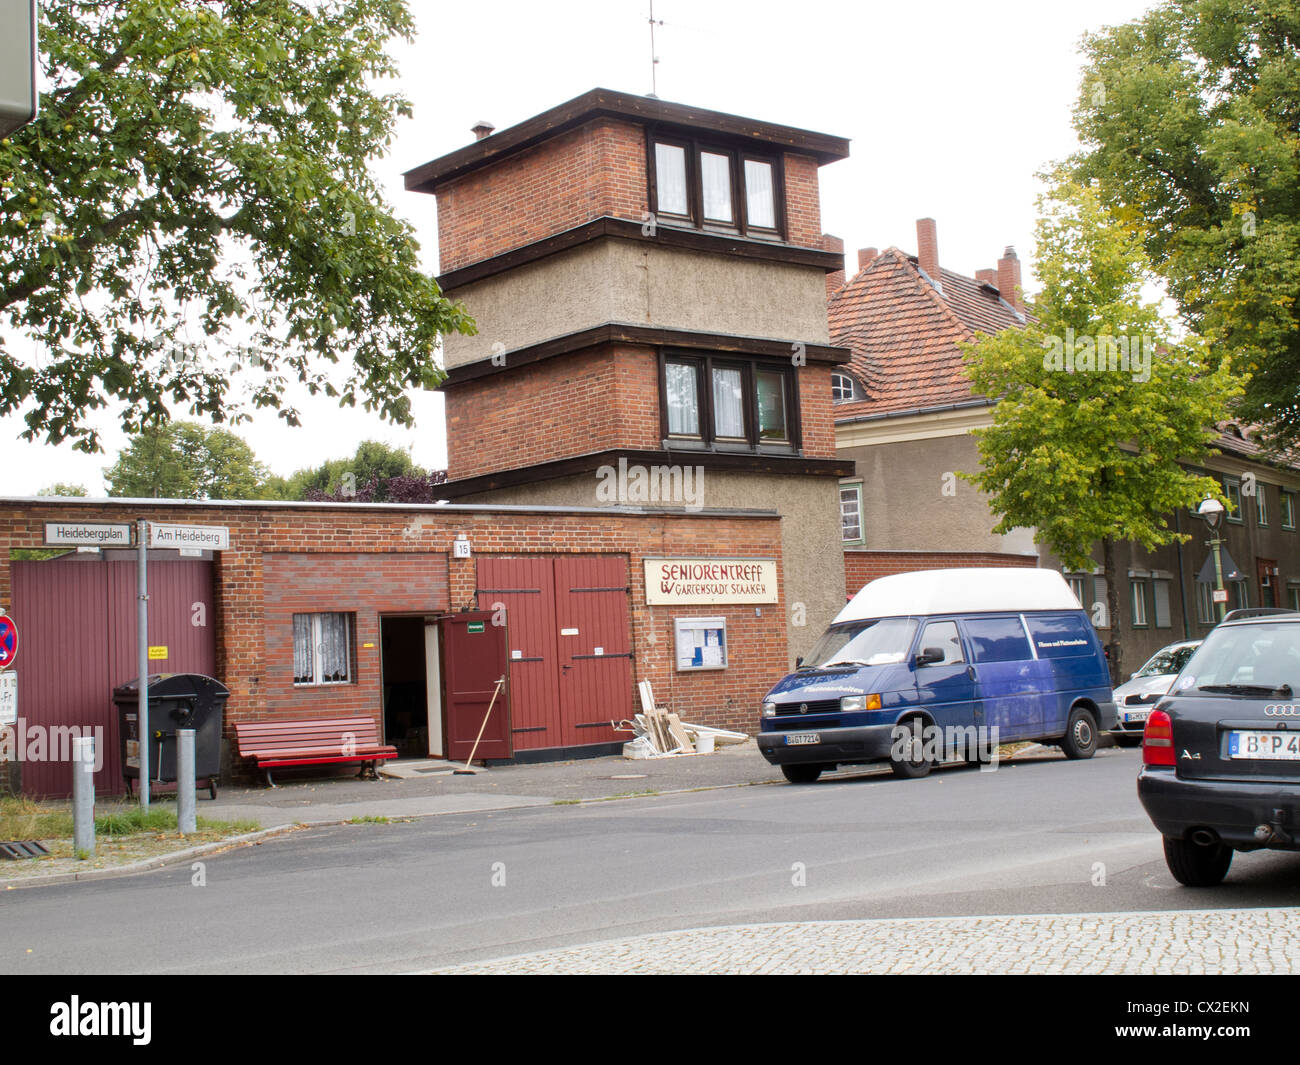 The Berlin Wall Region at Staaken, West Berlin the former fire station Stock Photo